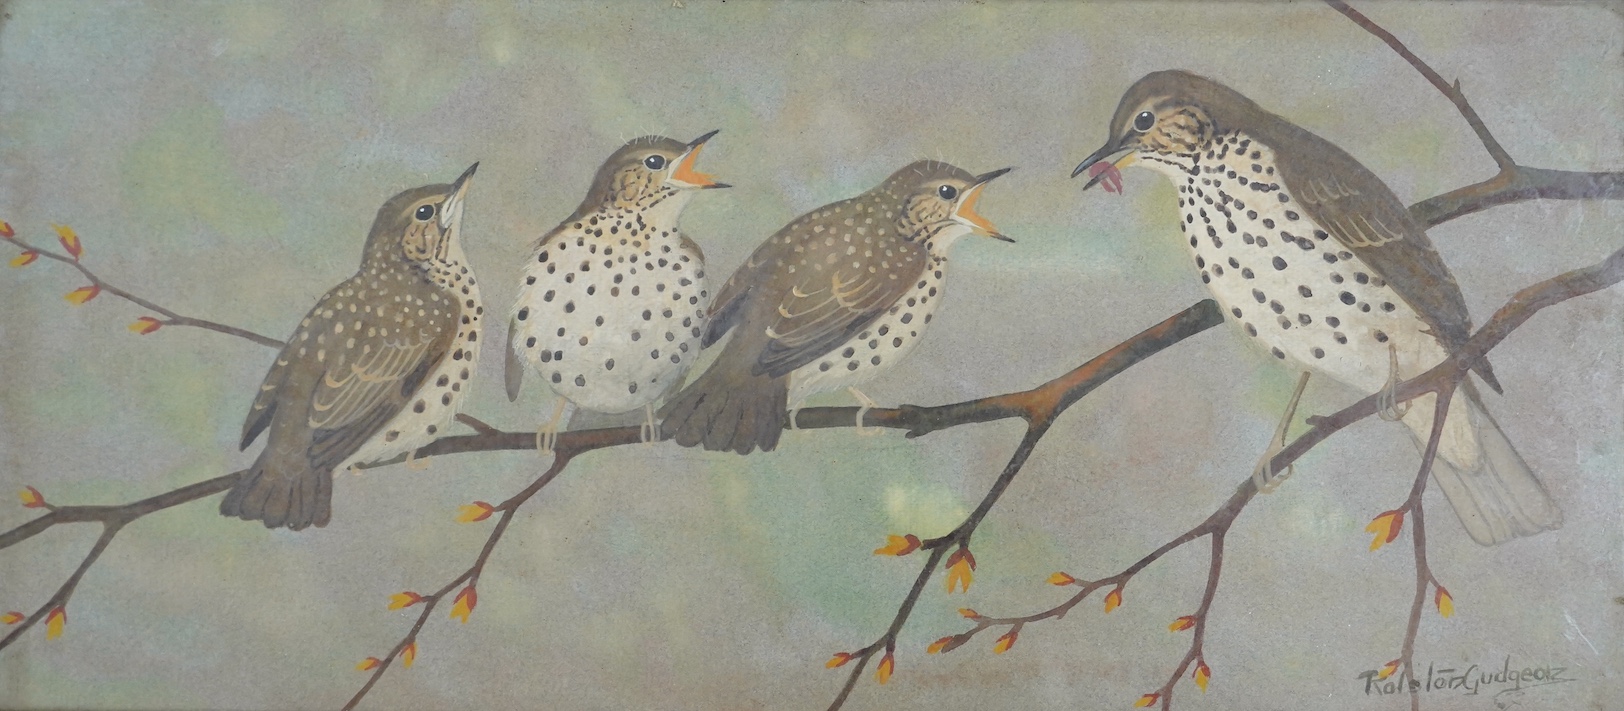 Ralston Gudgeon (Scottish, 1910-1984), watercolour, Study of four Thrushes on a branch, signed, 22 x 50cm. Condition - poor to fair